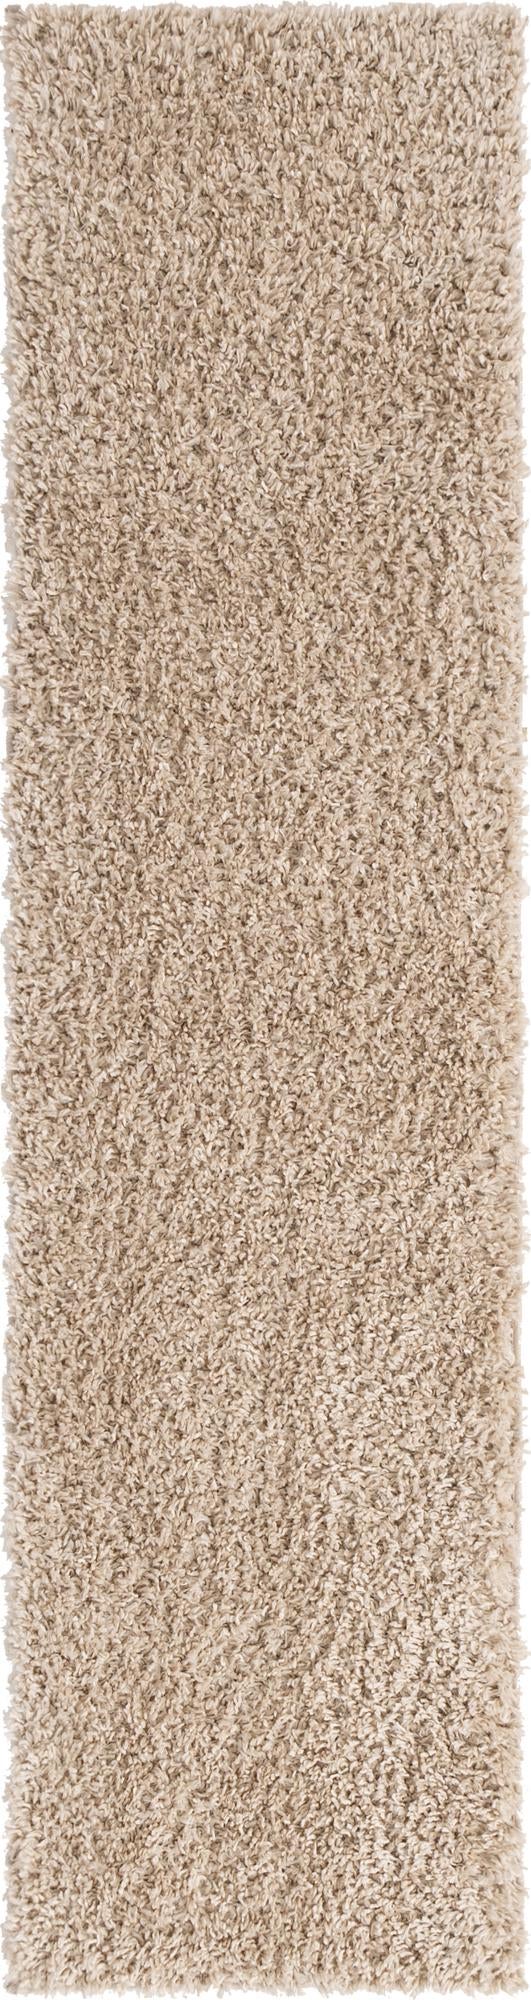 Unique Loom Davos Shag Rug Linen 2' 2" x 8' Runner Solid Comfort Perfect For Bathroom Hallway Mud Room Laundry Room - image 3 of 7